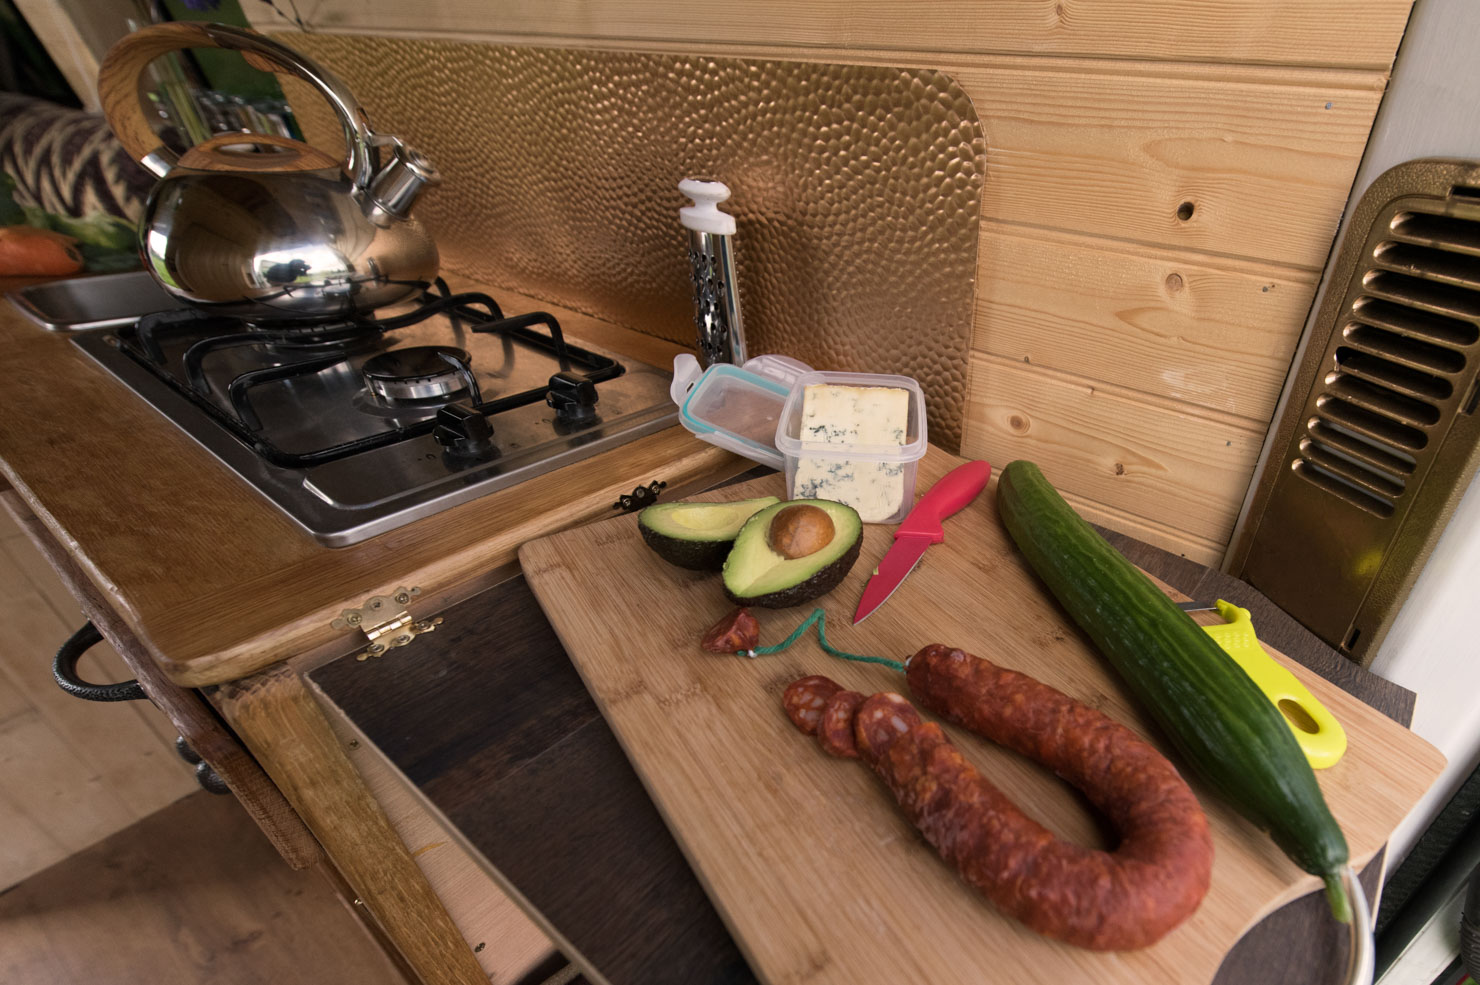 A kitchen counter with a wooden wall in the background. On the counter are an avocado, sliced sausage, a cucumber, a knife with a red handle, and a small container of blue cheese. A stainless steel teapot sits on a gas stove burner to the left, and a yellow peeler is next to the cucumber.